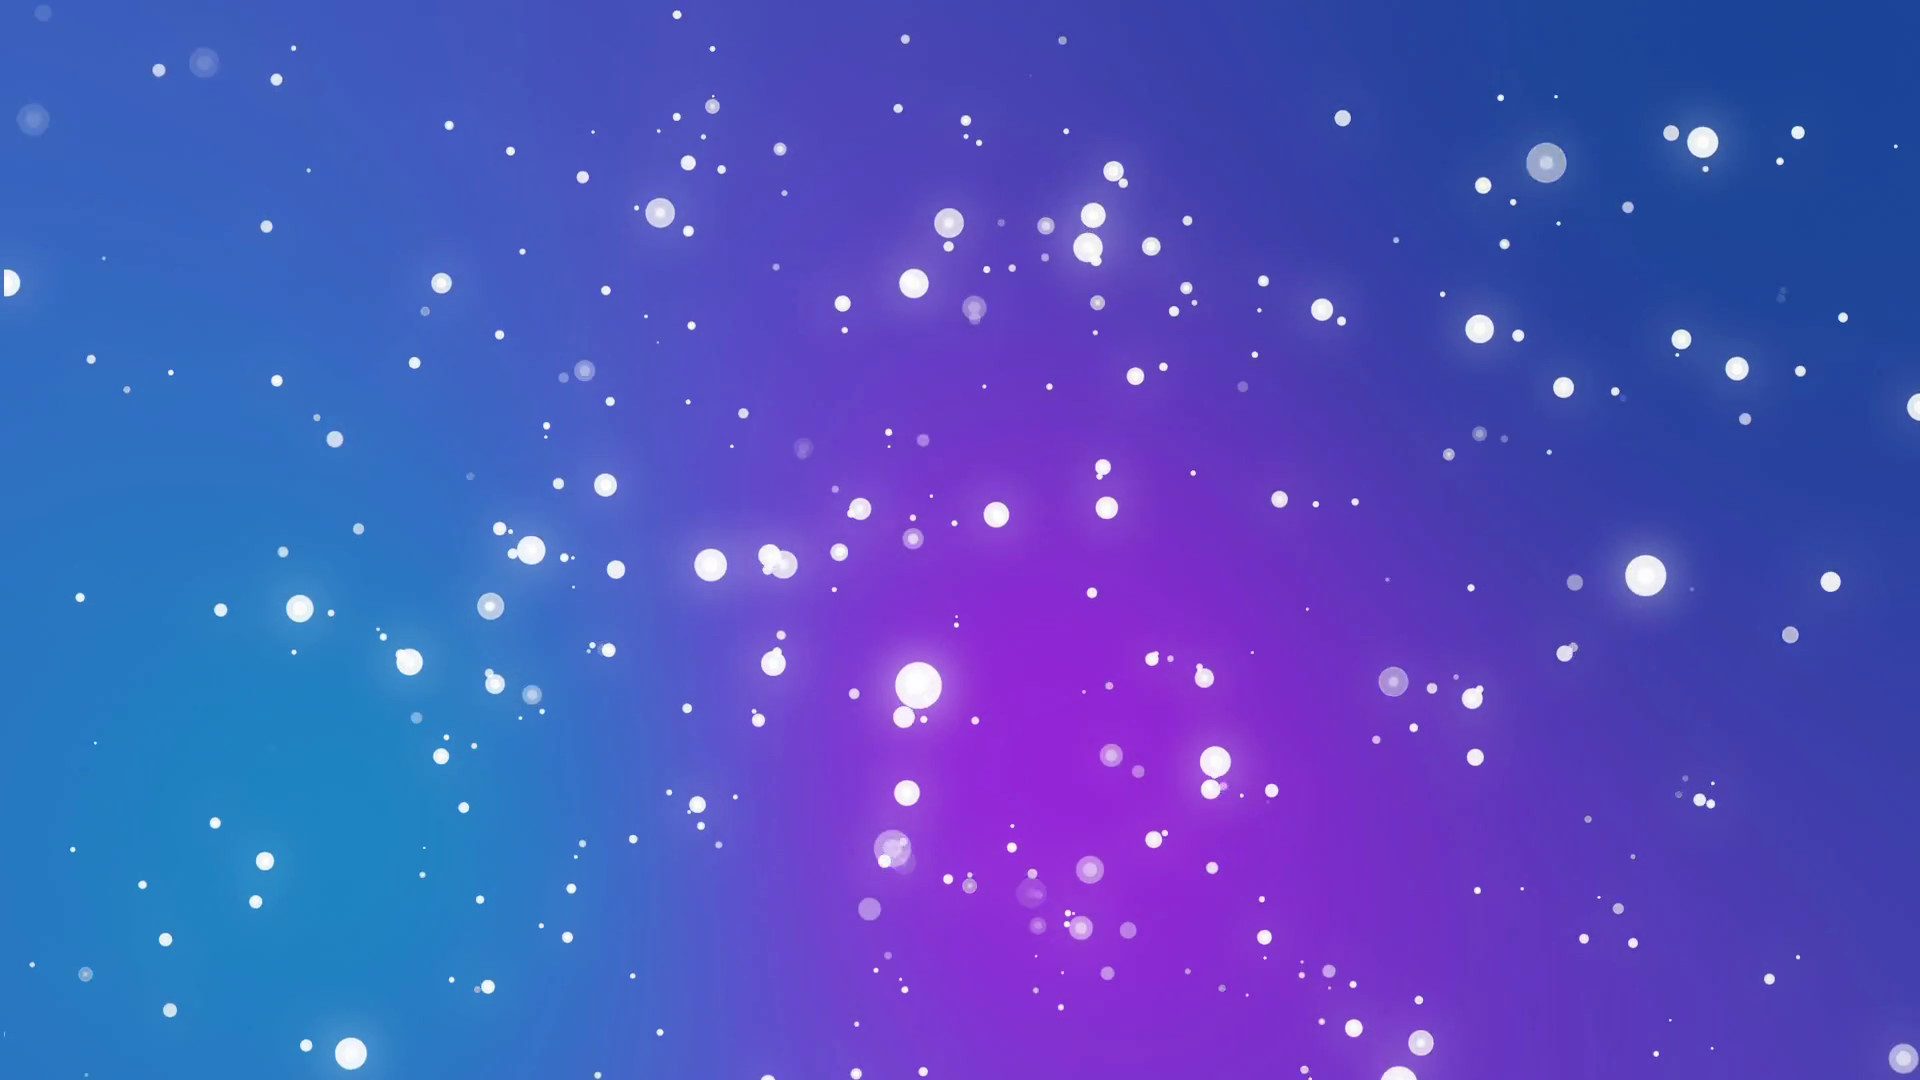 1920x1080 Fantasy purple blue gradient Christmas background with falling sparkly  white snowflakes Motion Background - VideoBlocks